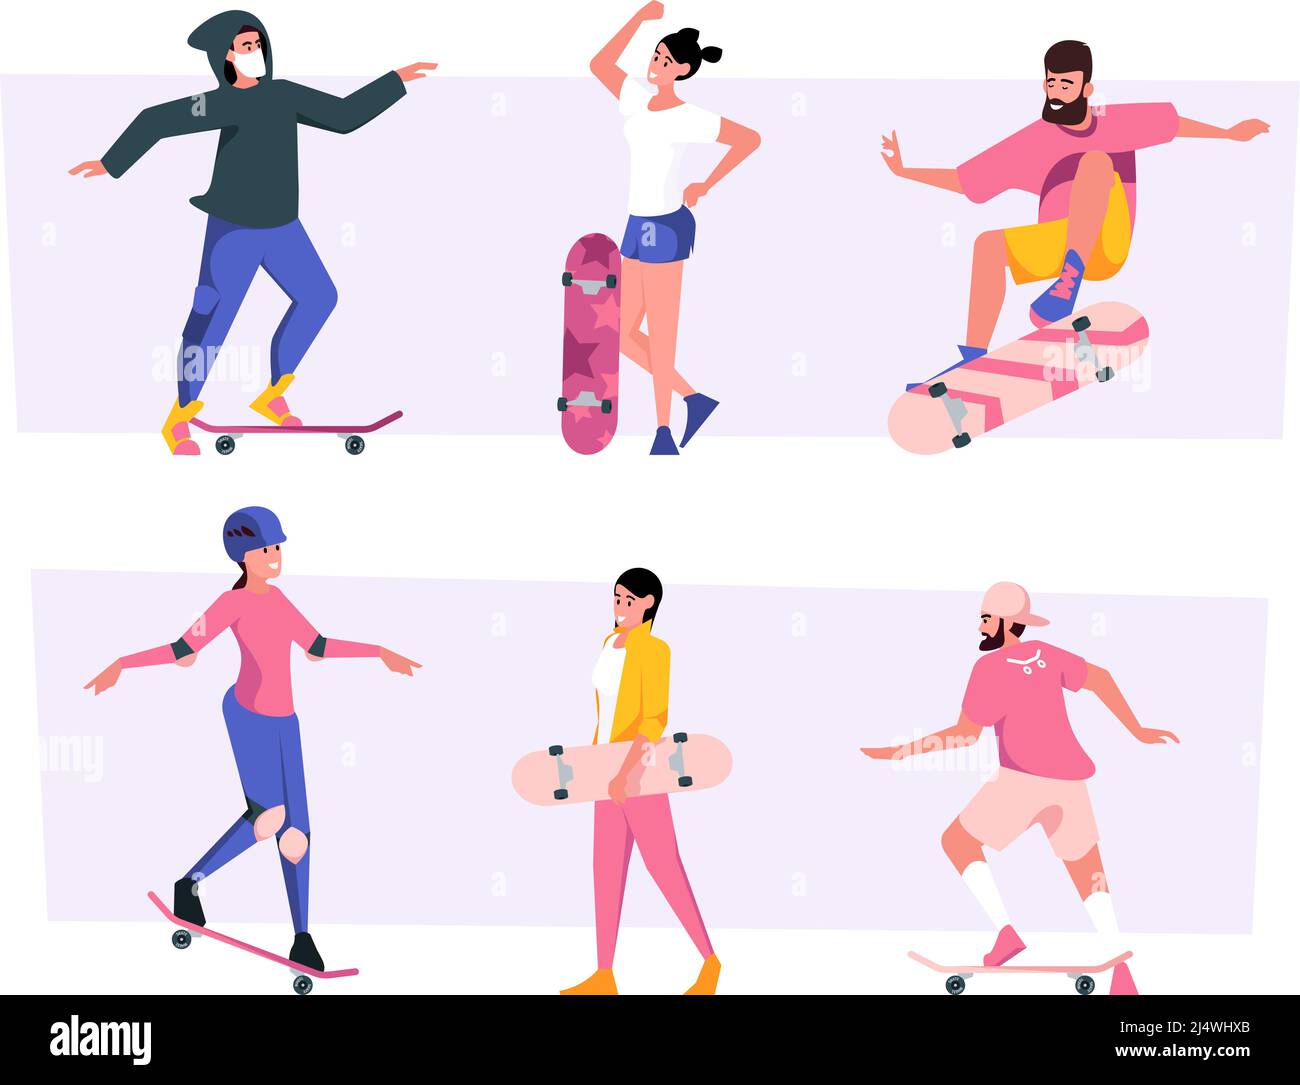 Collection Set Of Various Parkour Men Running And Jumping In Different Action  Poses. An Urban Extreme Sport For Young People Concept. Isolated Vector  Illustration On White Background In Cartoon Style Royalty Free